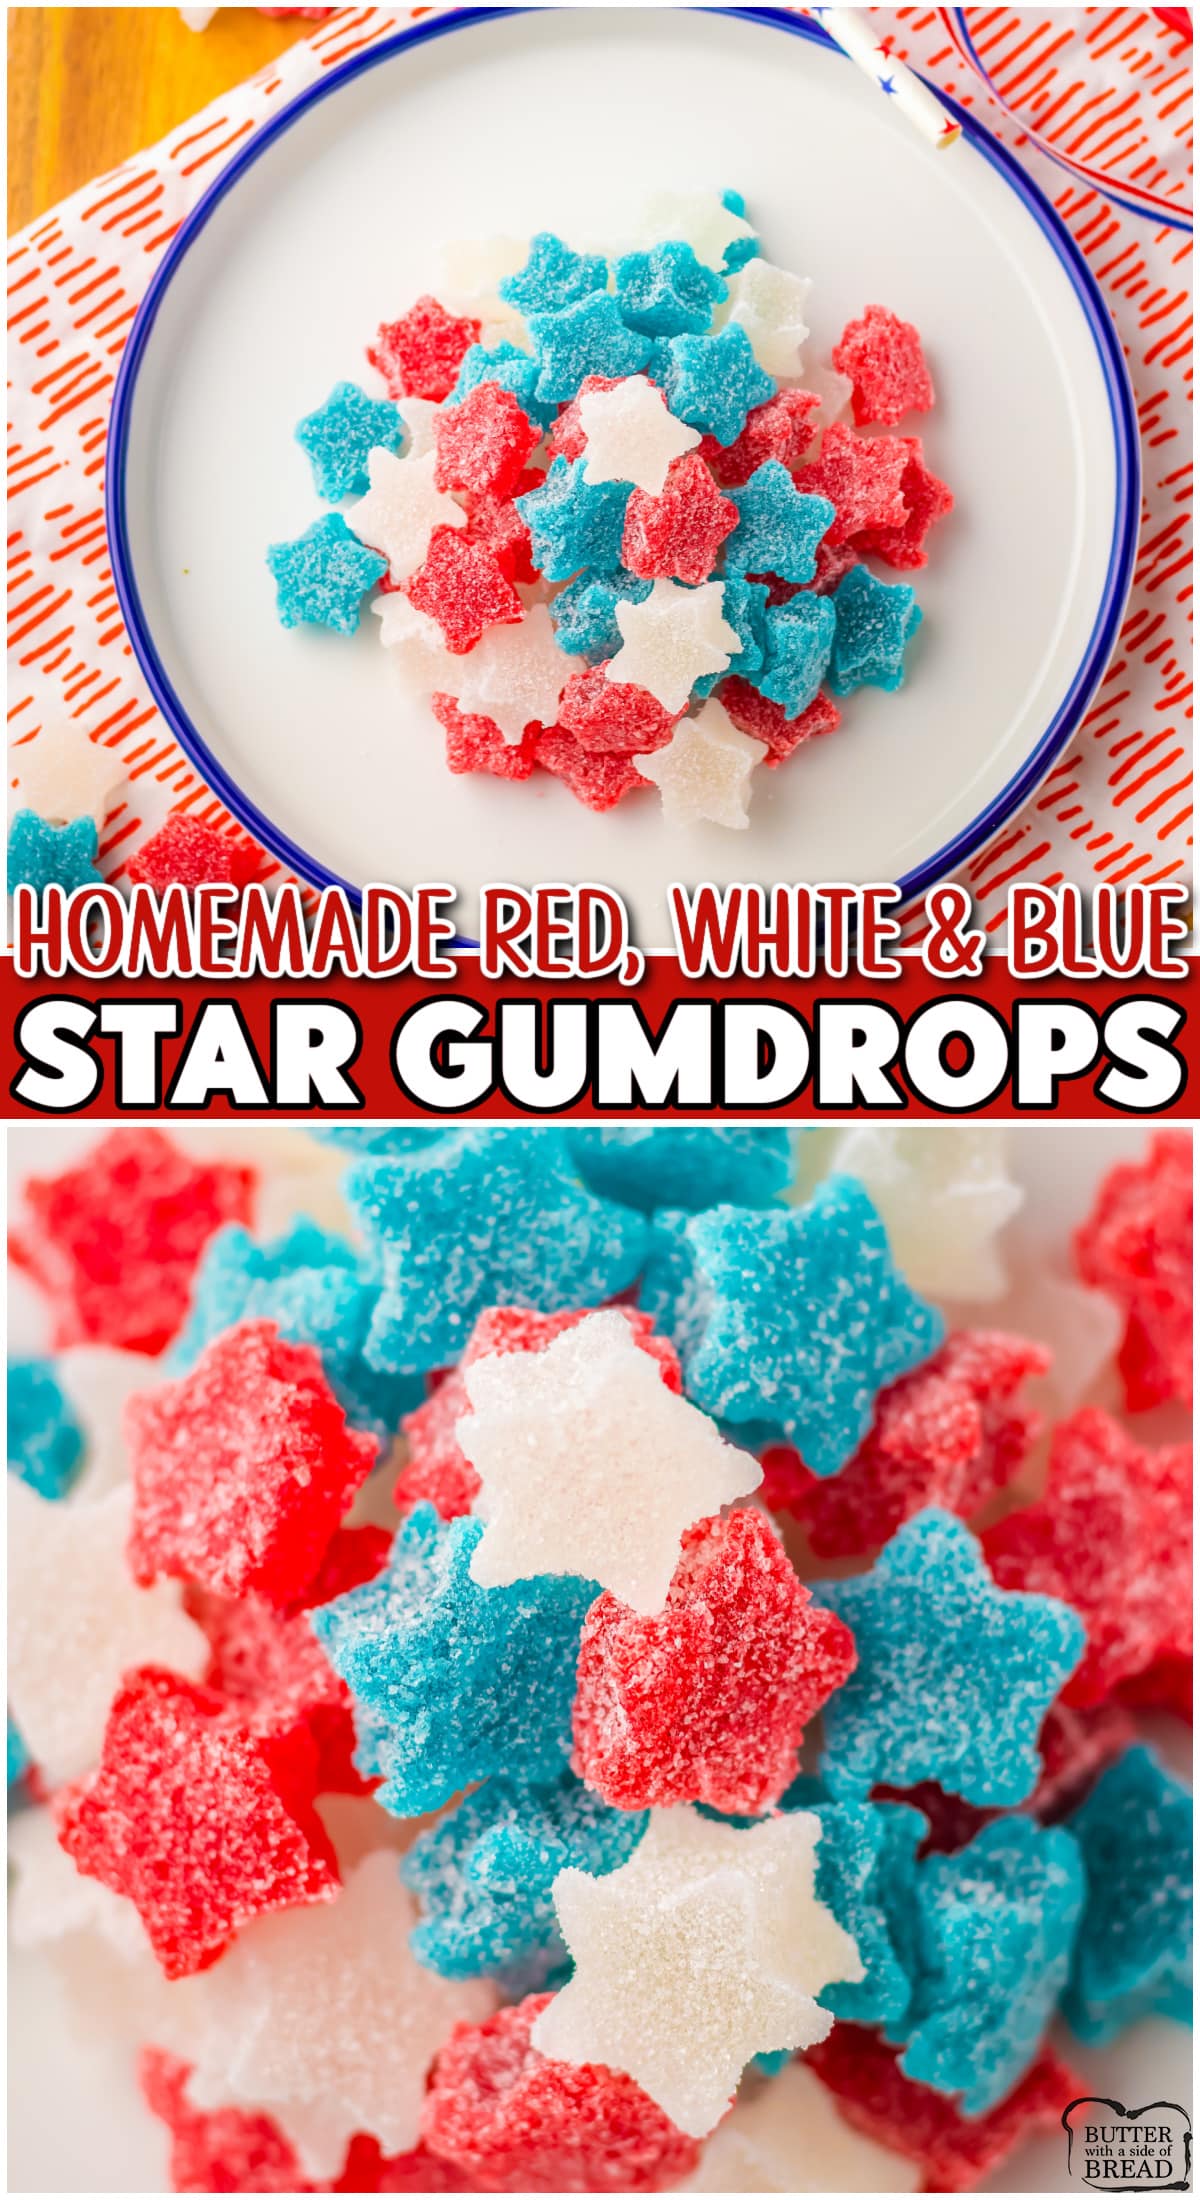 Red White & Blue Gumdrops are easy candies made with Jello, sugar & applesauce! They're a festive & delicious 4th of July dessert!